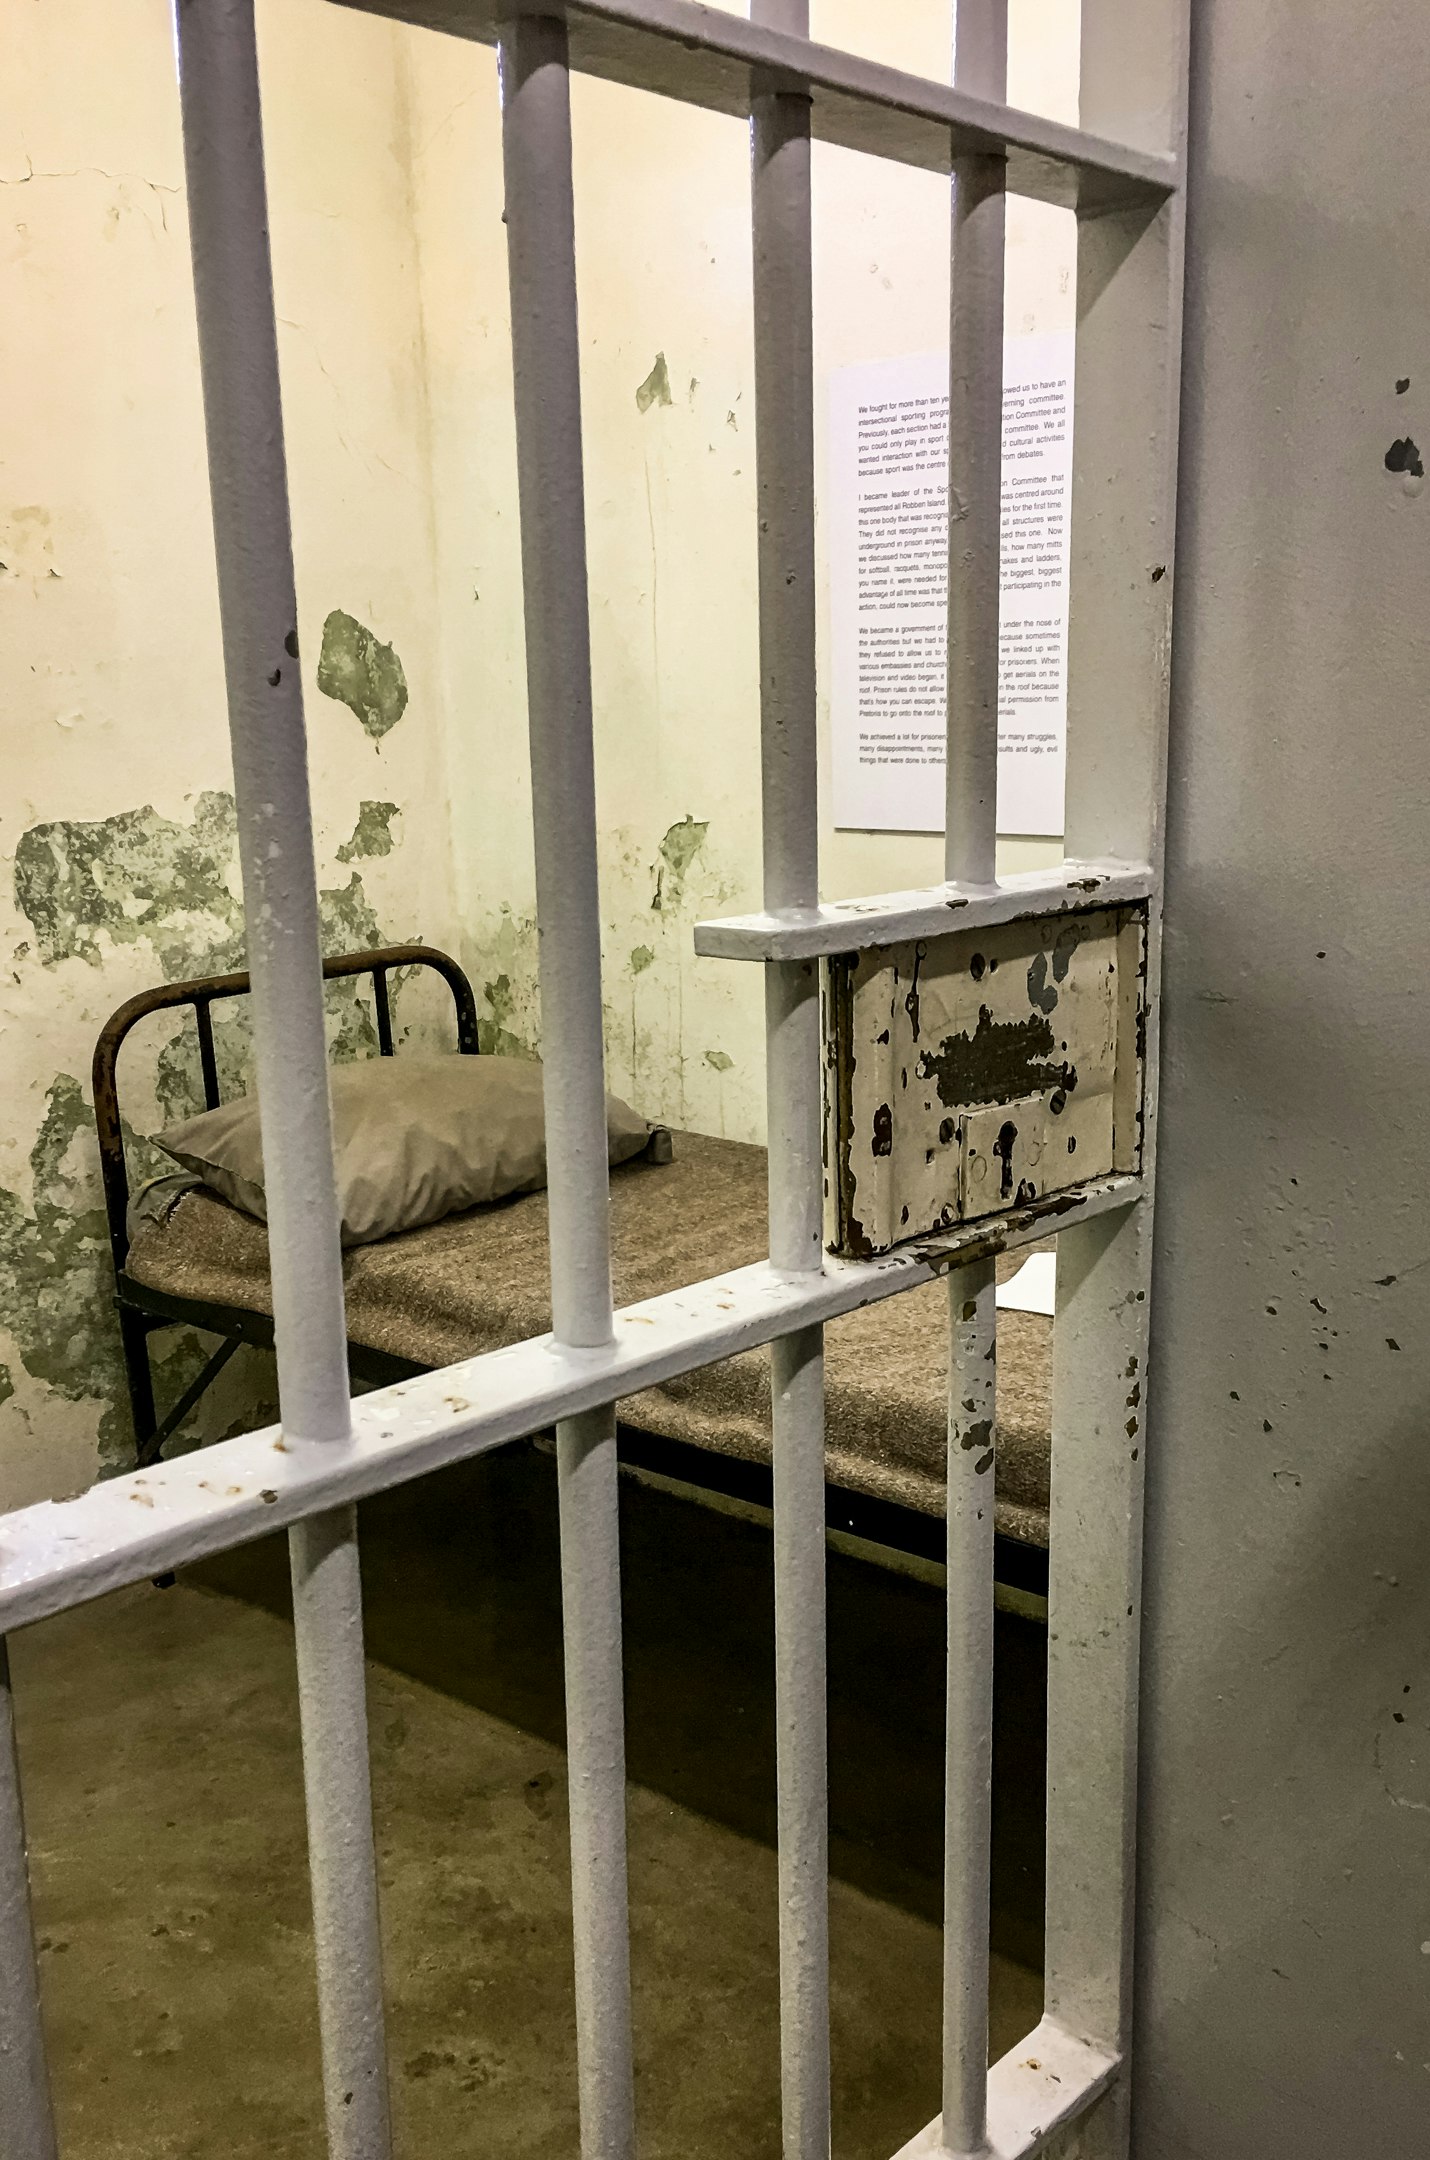 A small bed is visible within a tiny cell through the barred prison door.